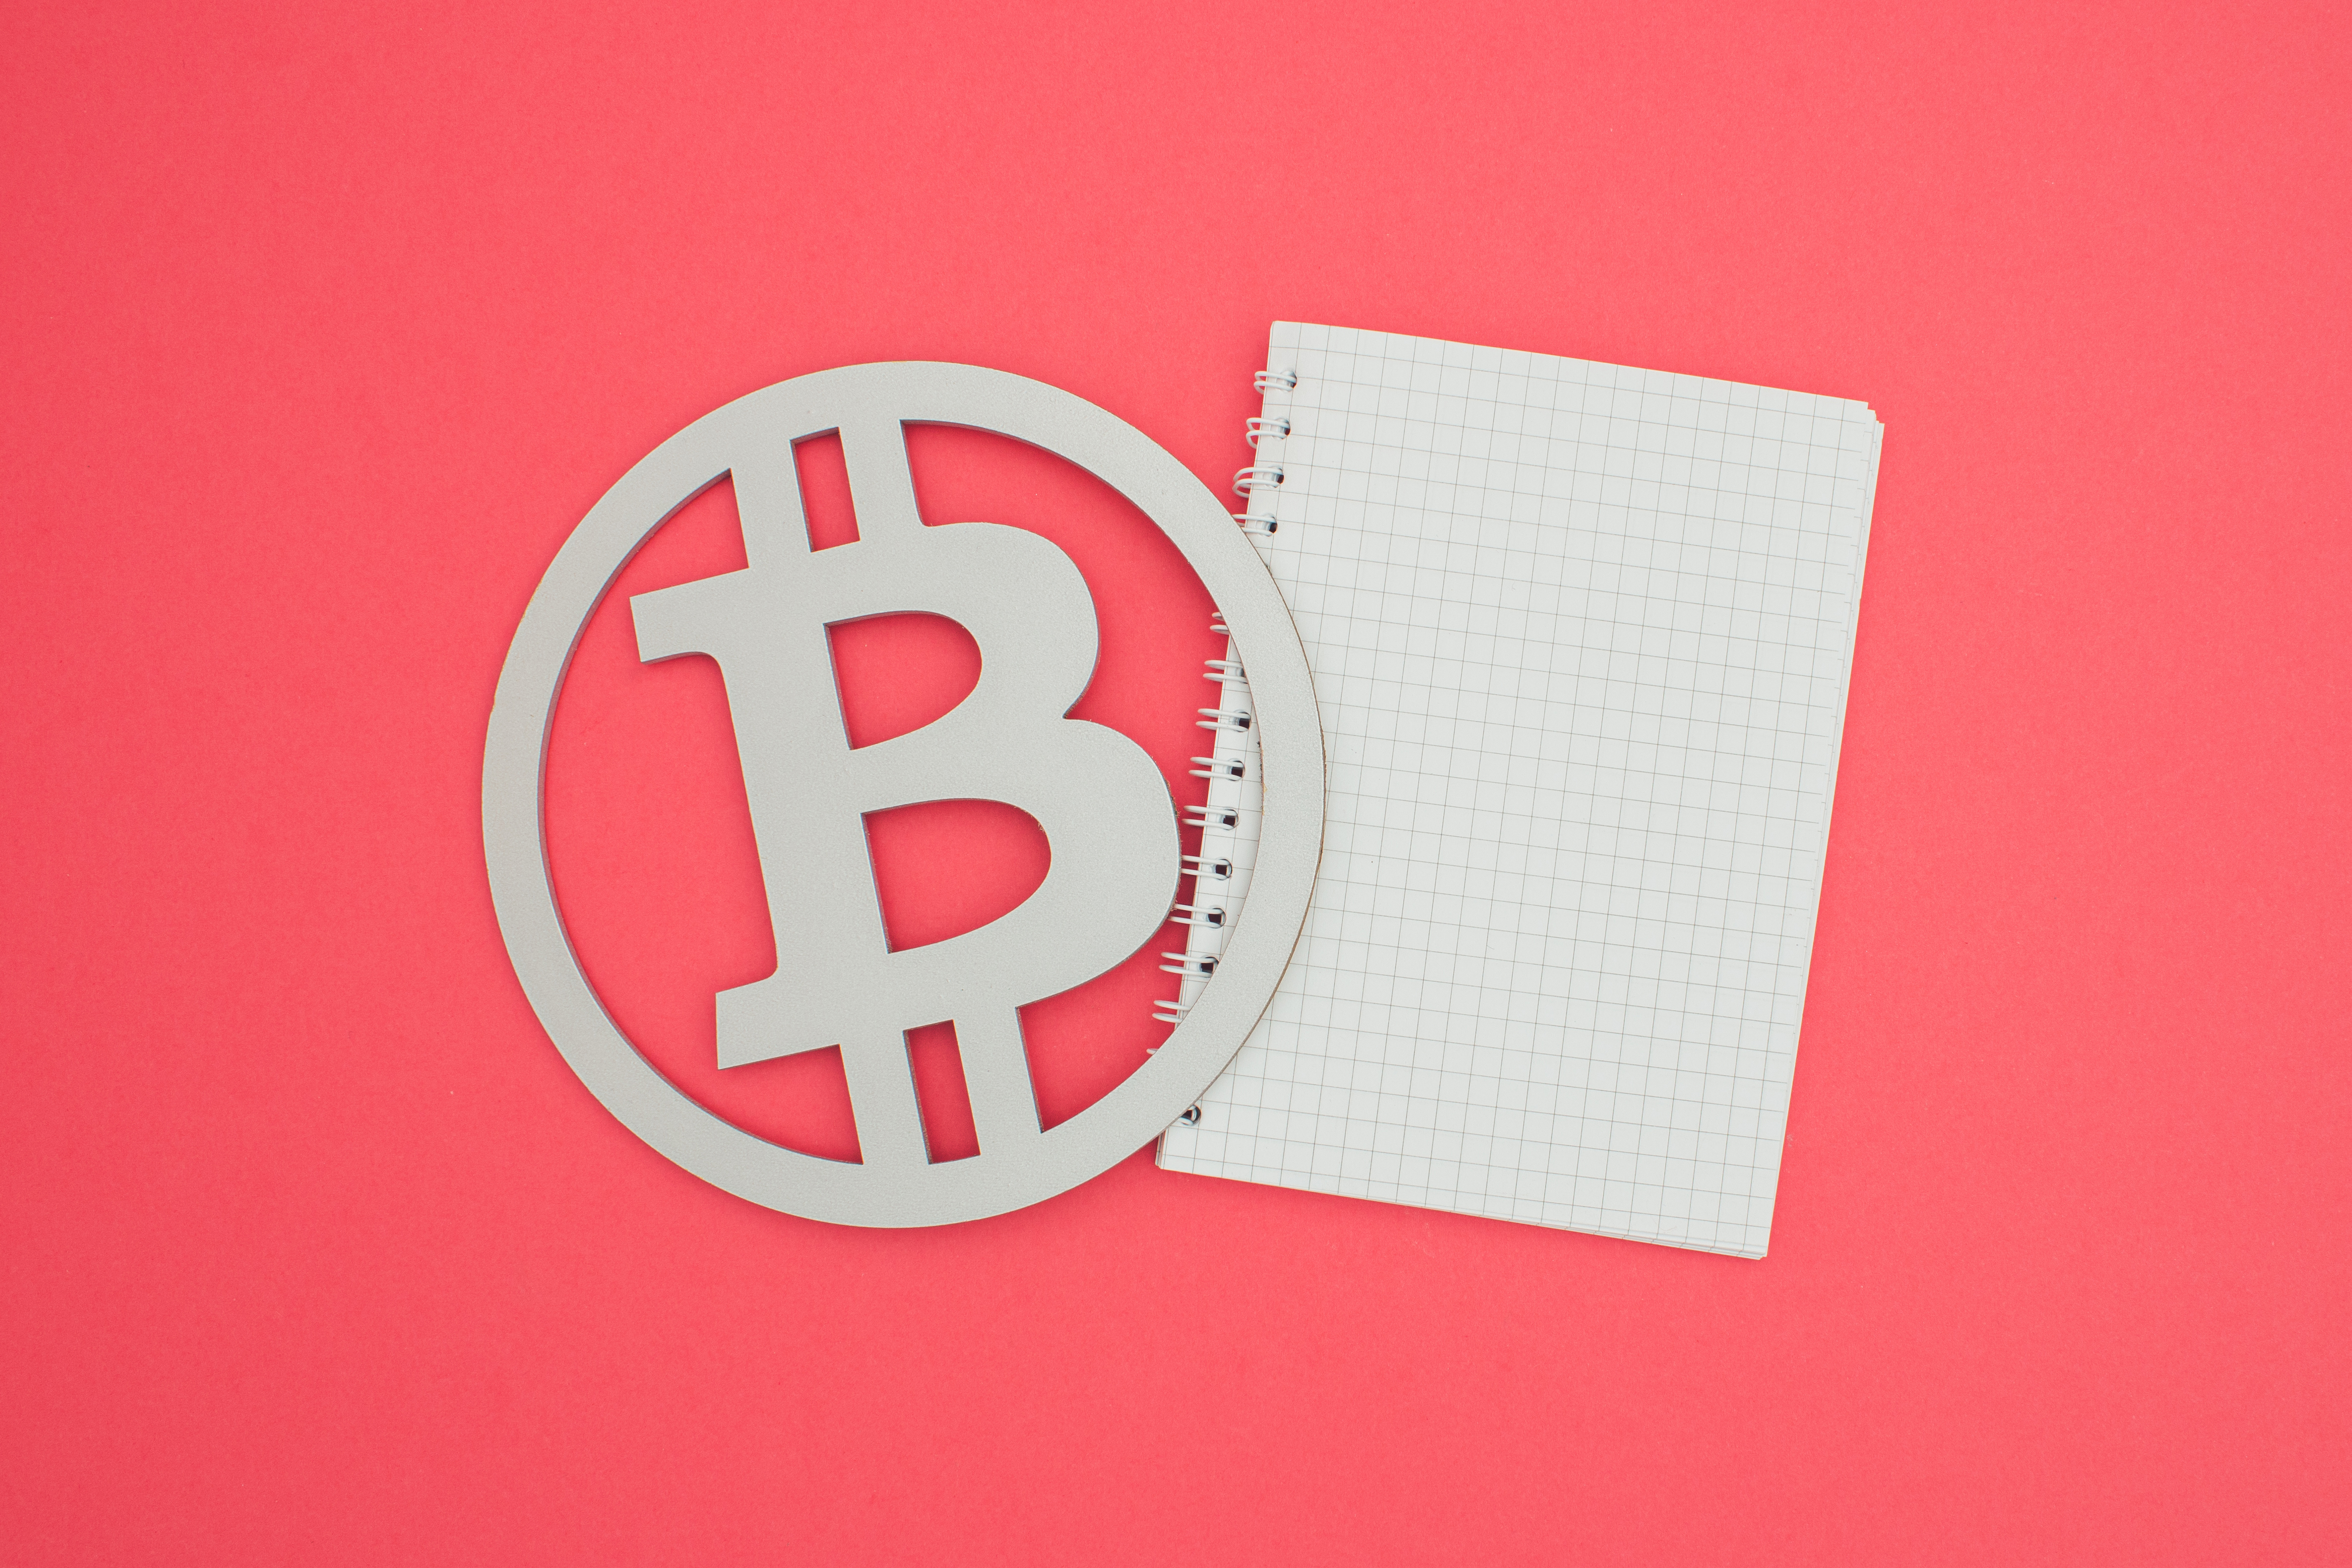 Image of bitcoin symbol and white notebook on salmon background.